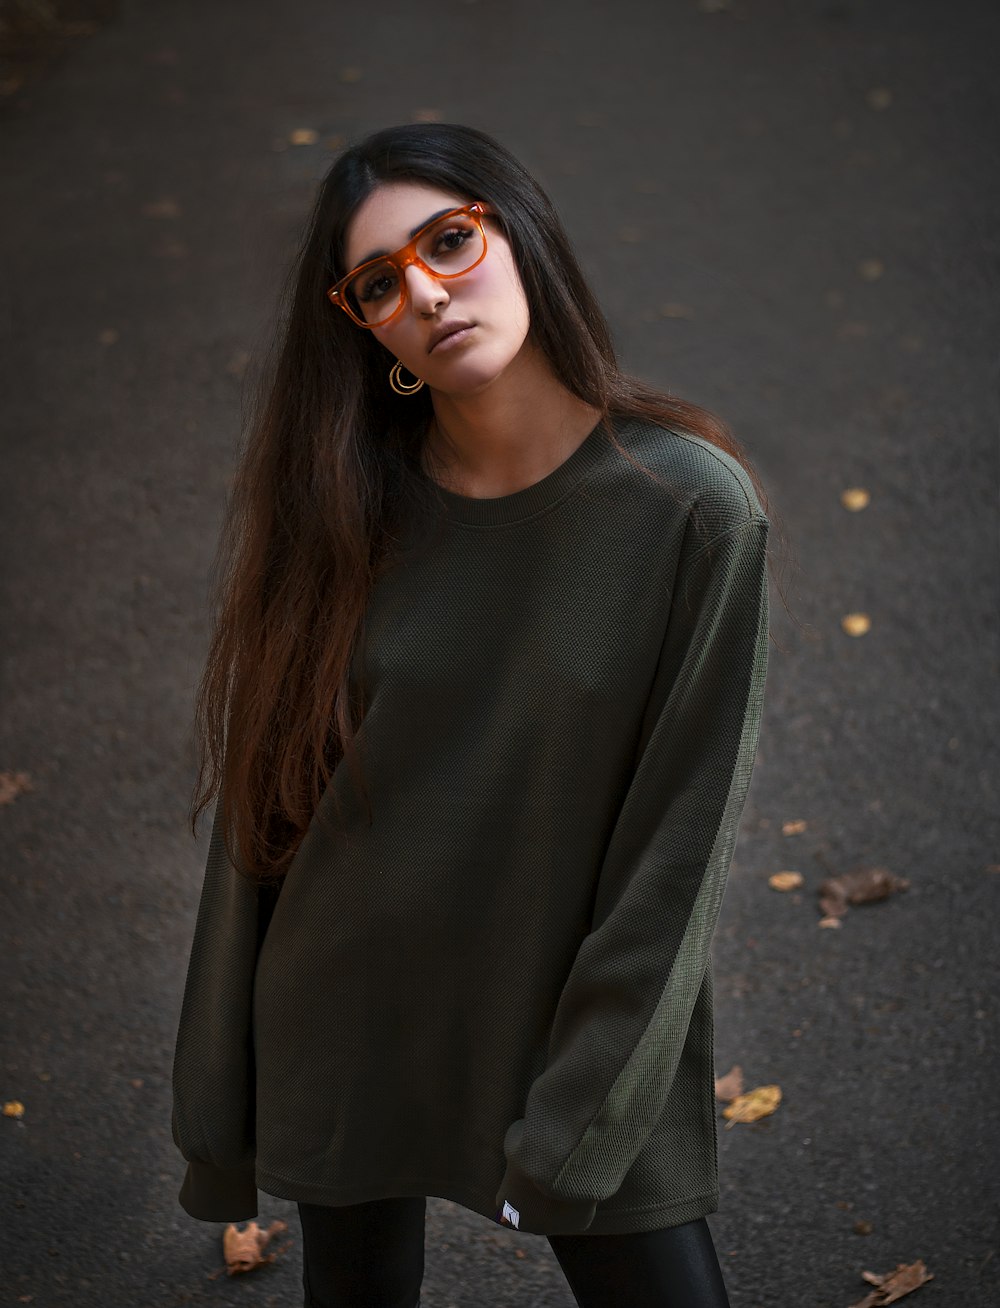 a woman with long hair wearing sunglasses and a green sweater